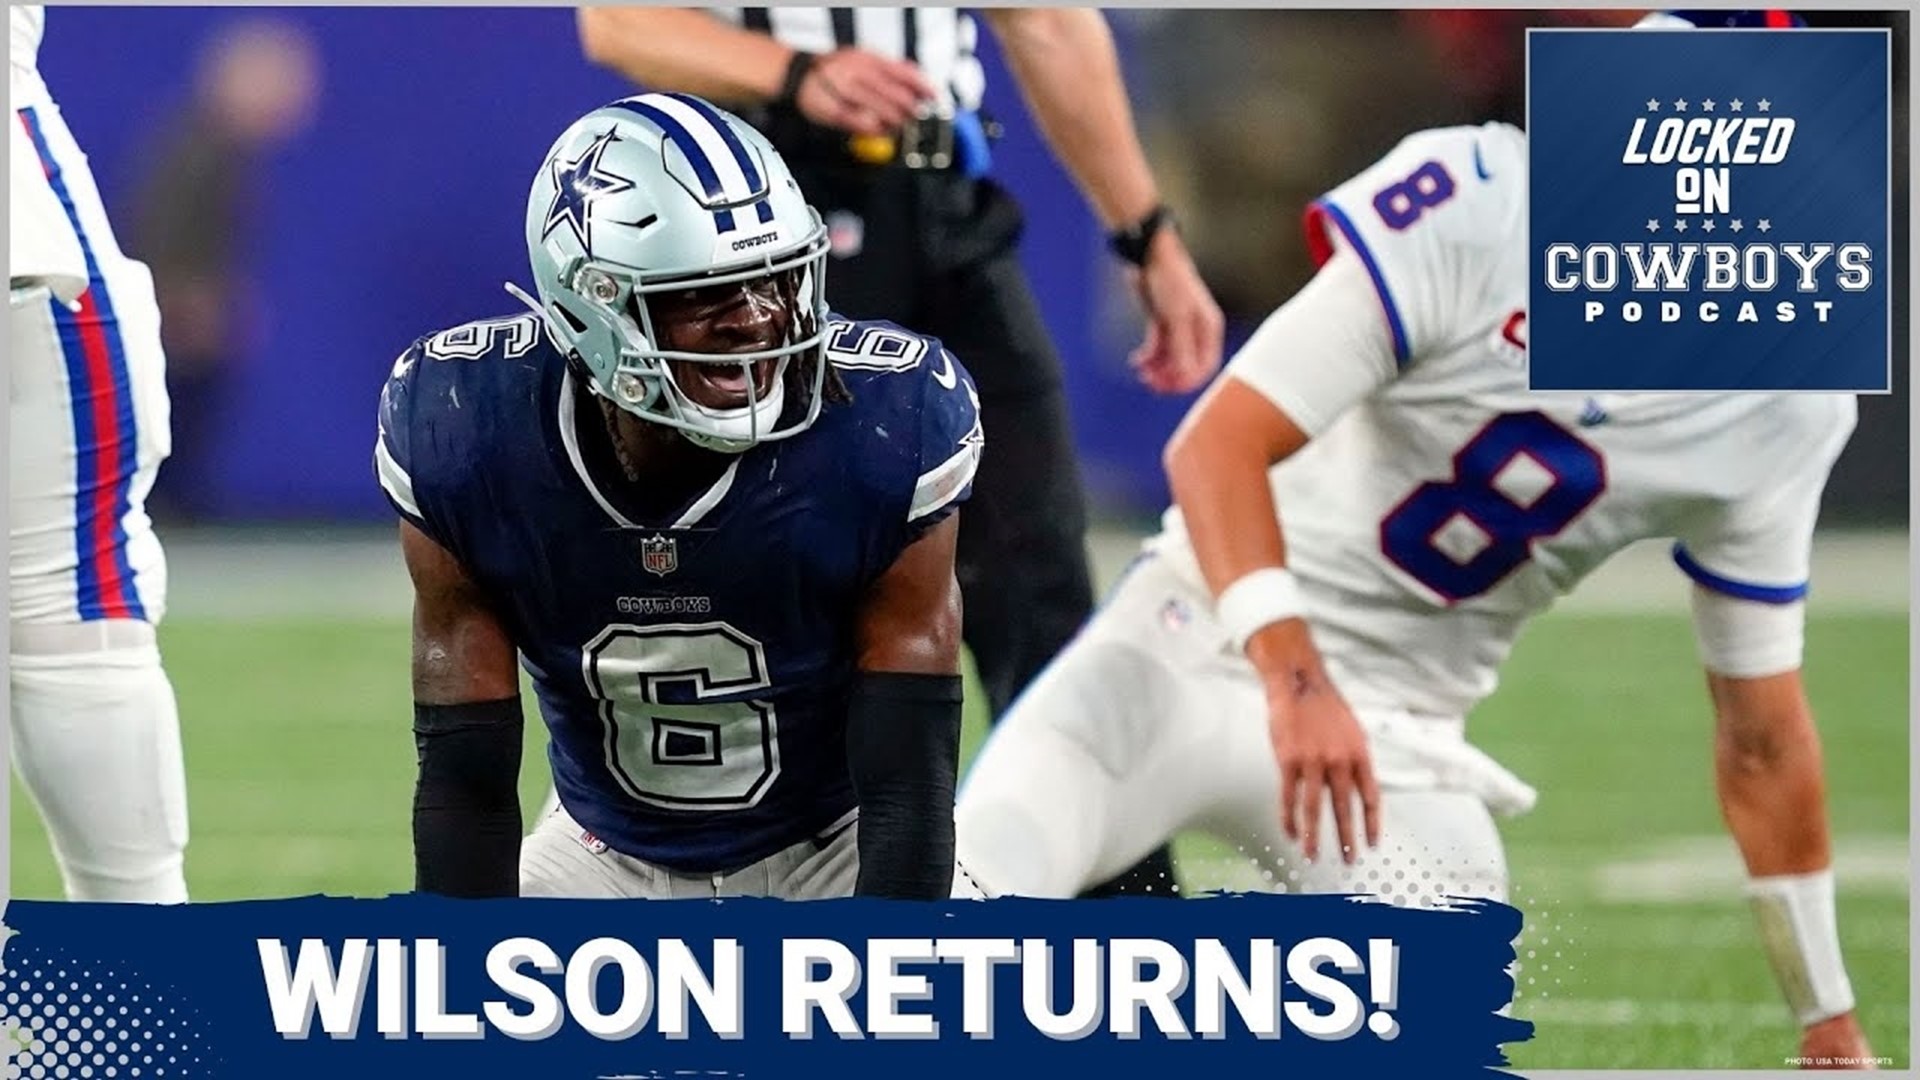 Marcus Mosher and Landon McCool discuss the Dallas Cowboys re-signing SS Donovan Wilson to a three-year deal.